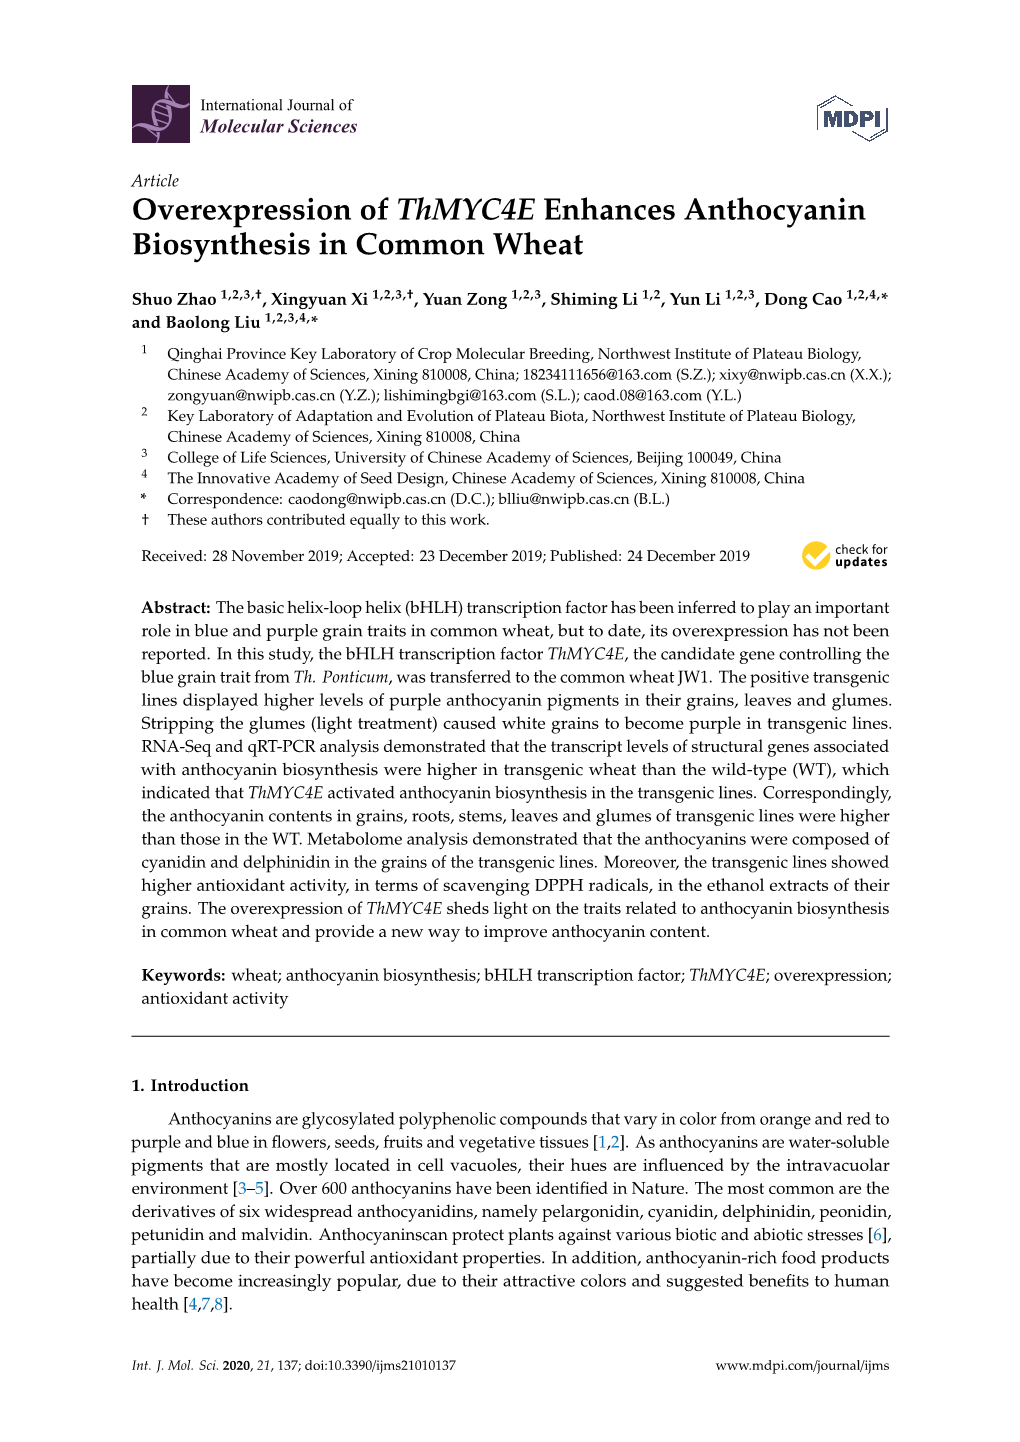 Overexpression of Thmyc4e Enhances Anthocyanin Biosynthesis in Common Wheat